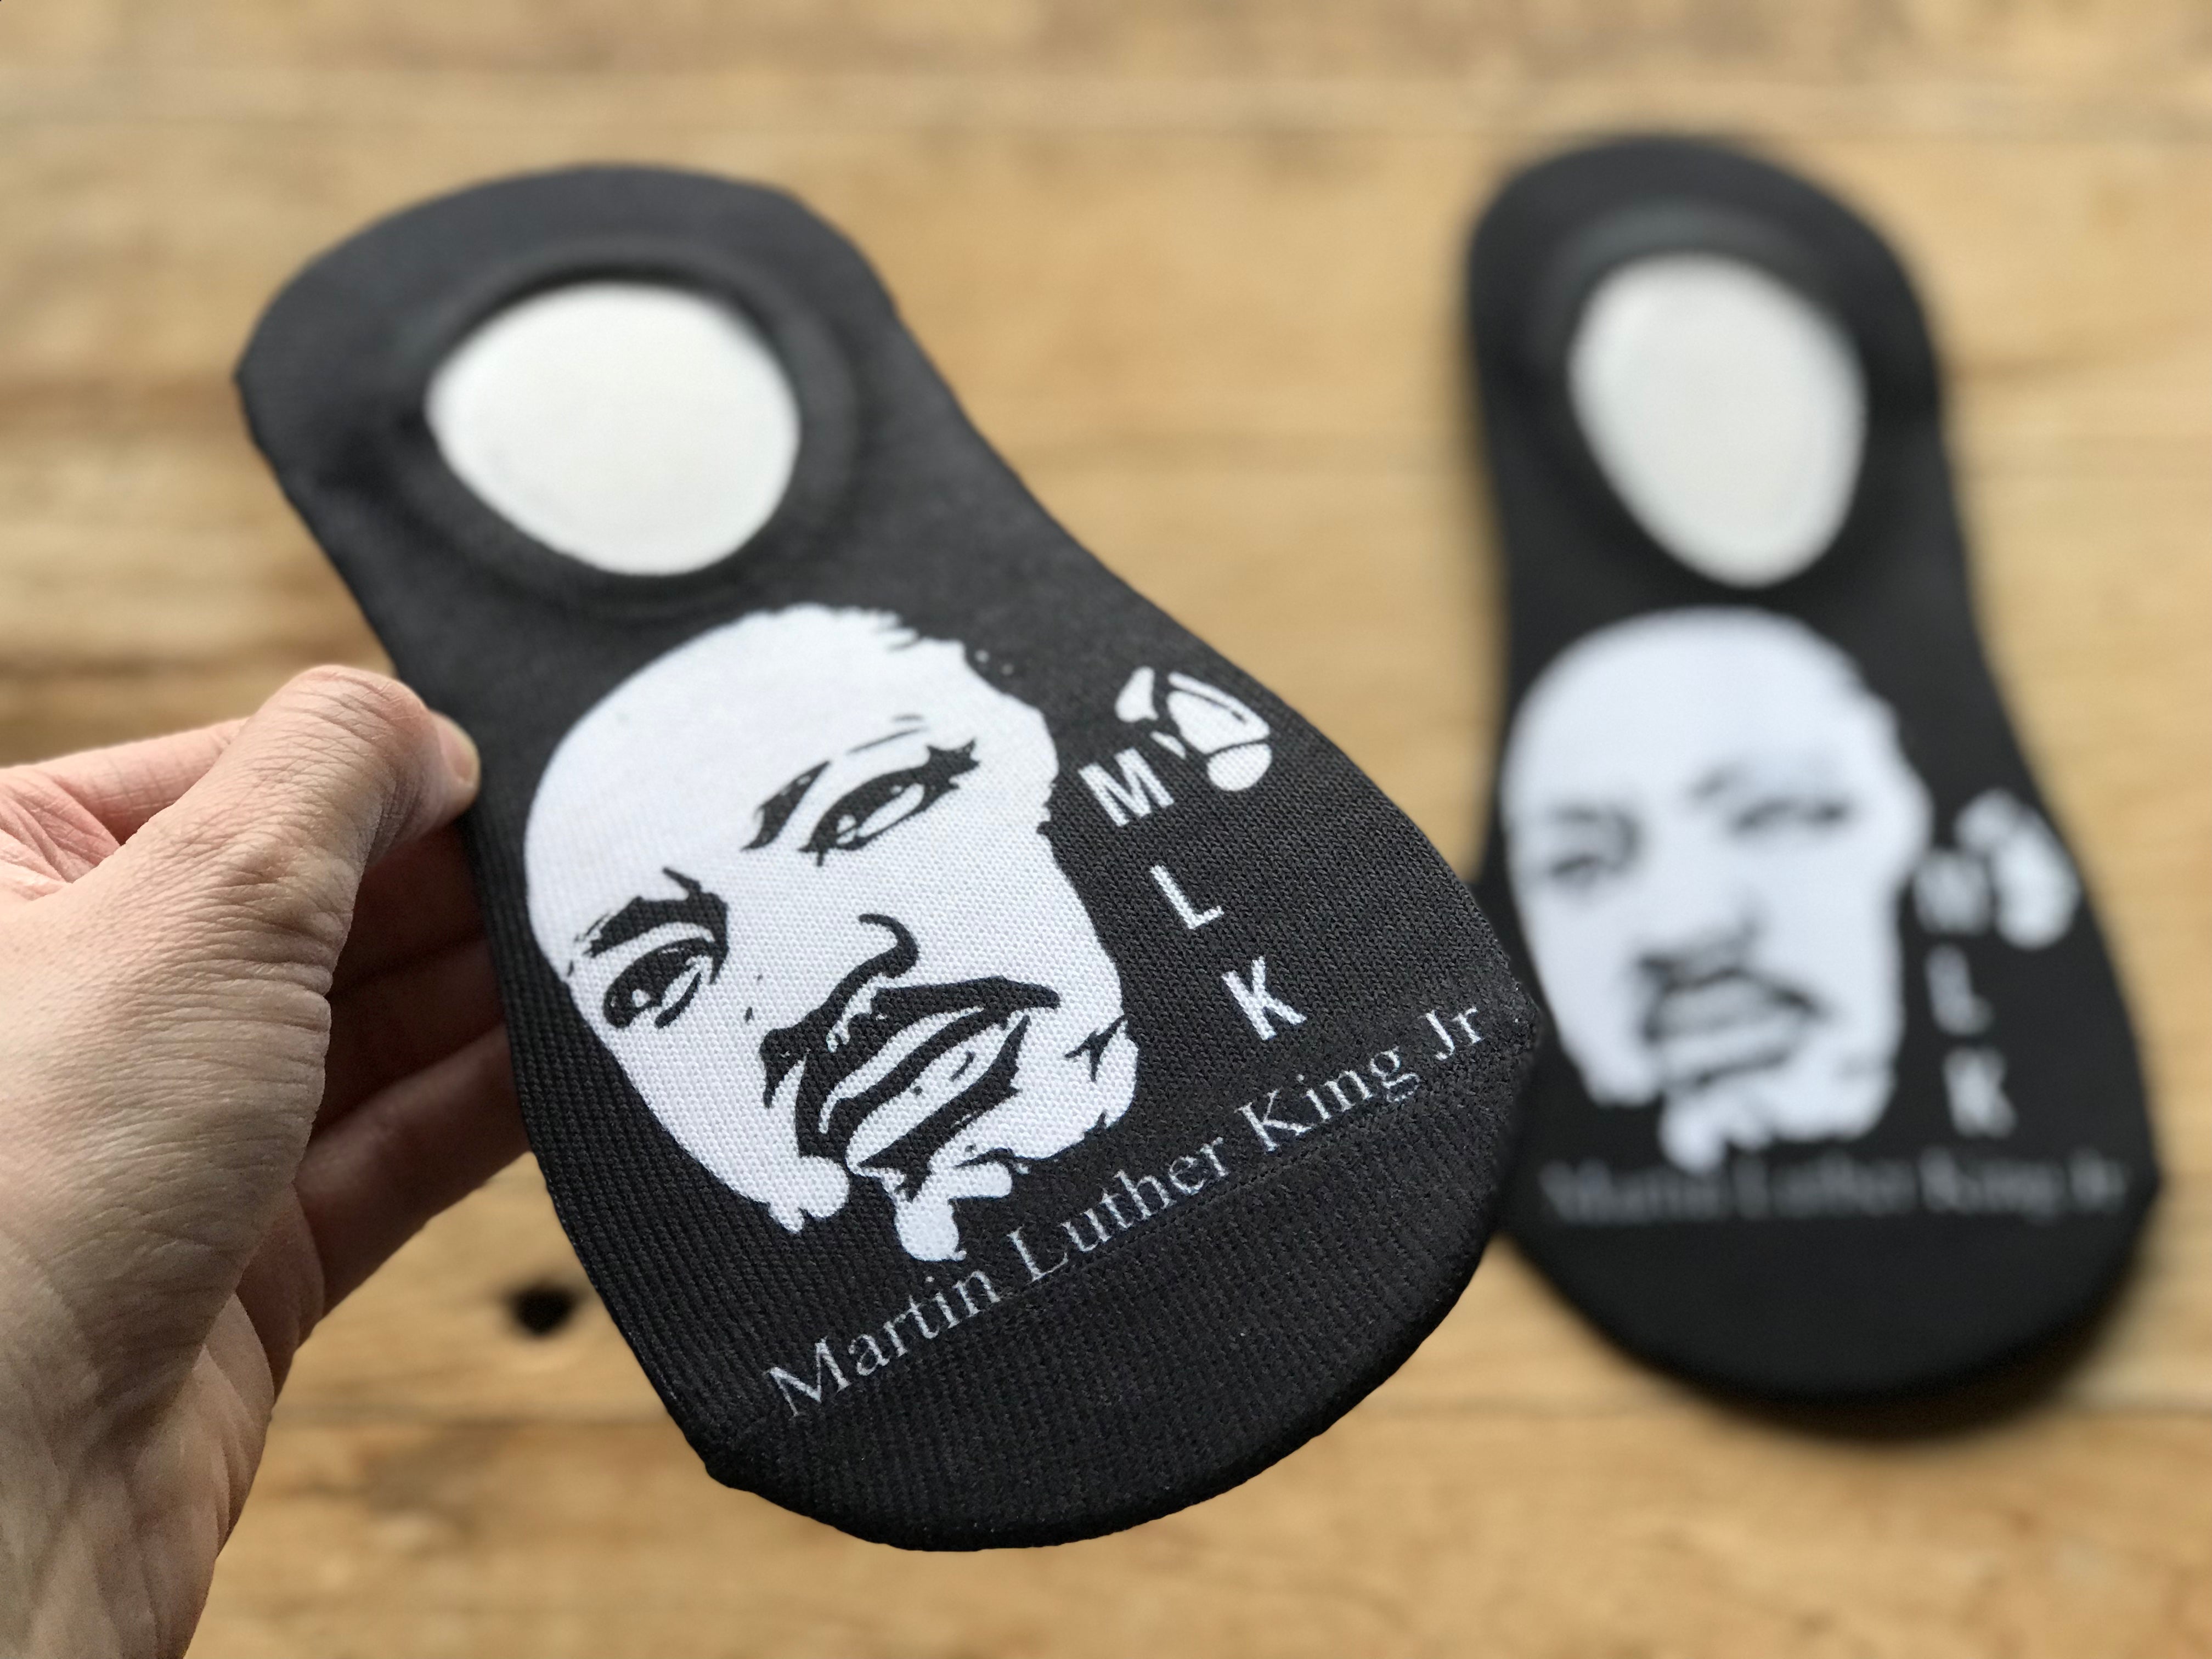 Martin Luther King Jr. His & Hers Socks